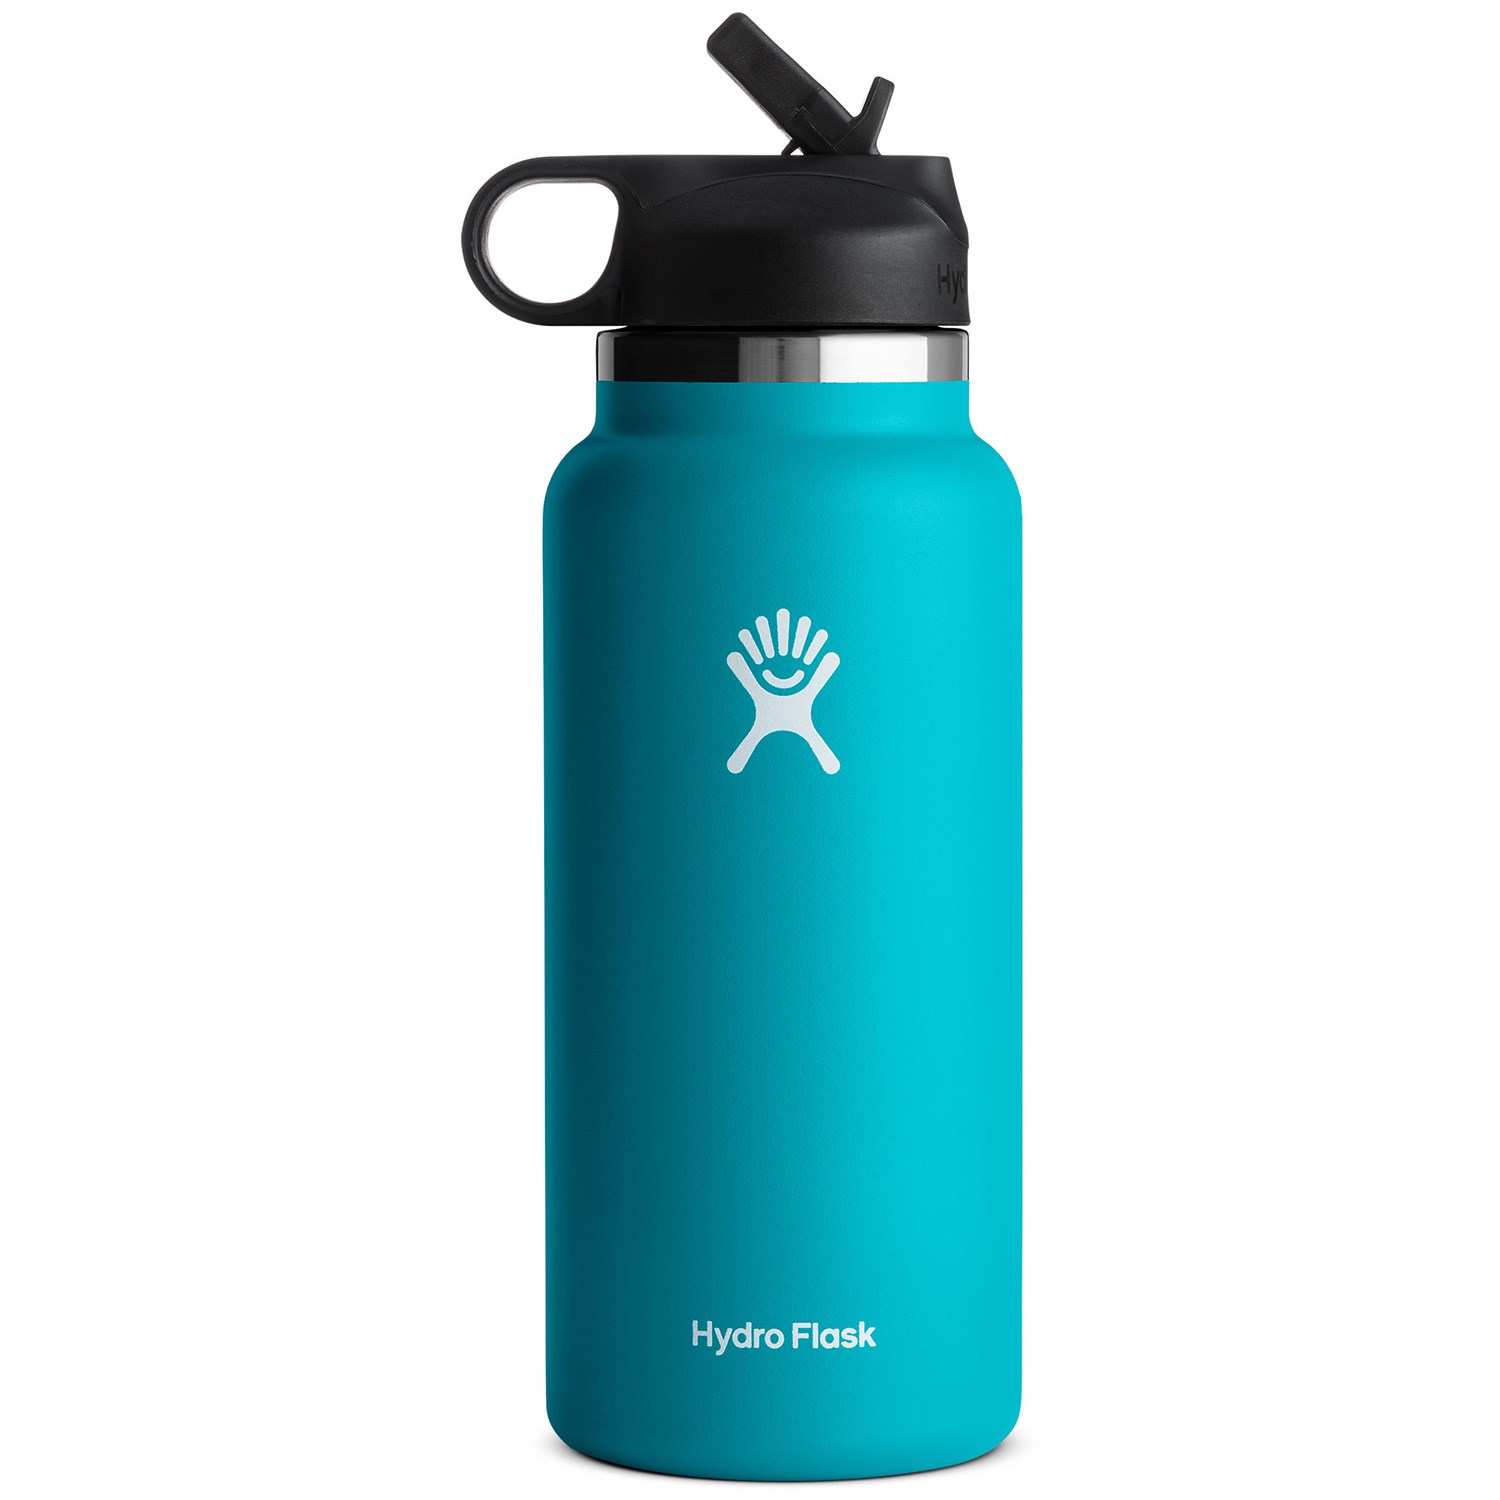 https://images.evo.com/imgp/zoom/167435/890790/hydro-flask-32oz-wide-mouth-straw-lid-water-bottle-.jpg